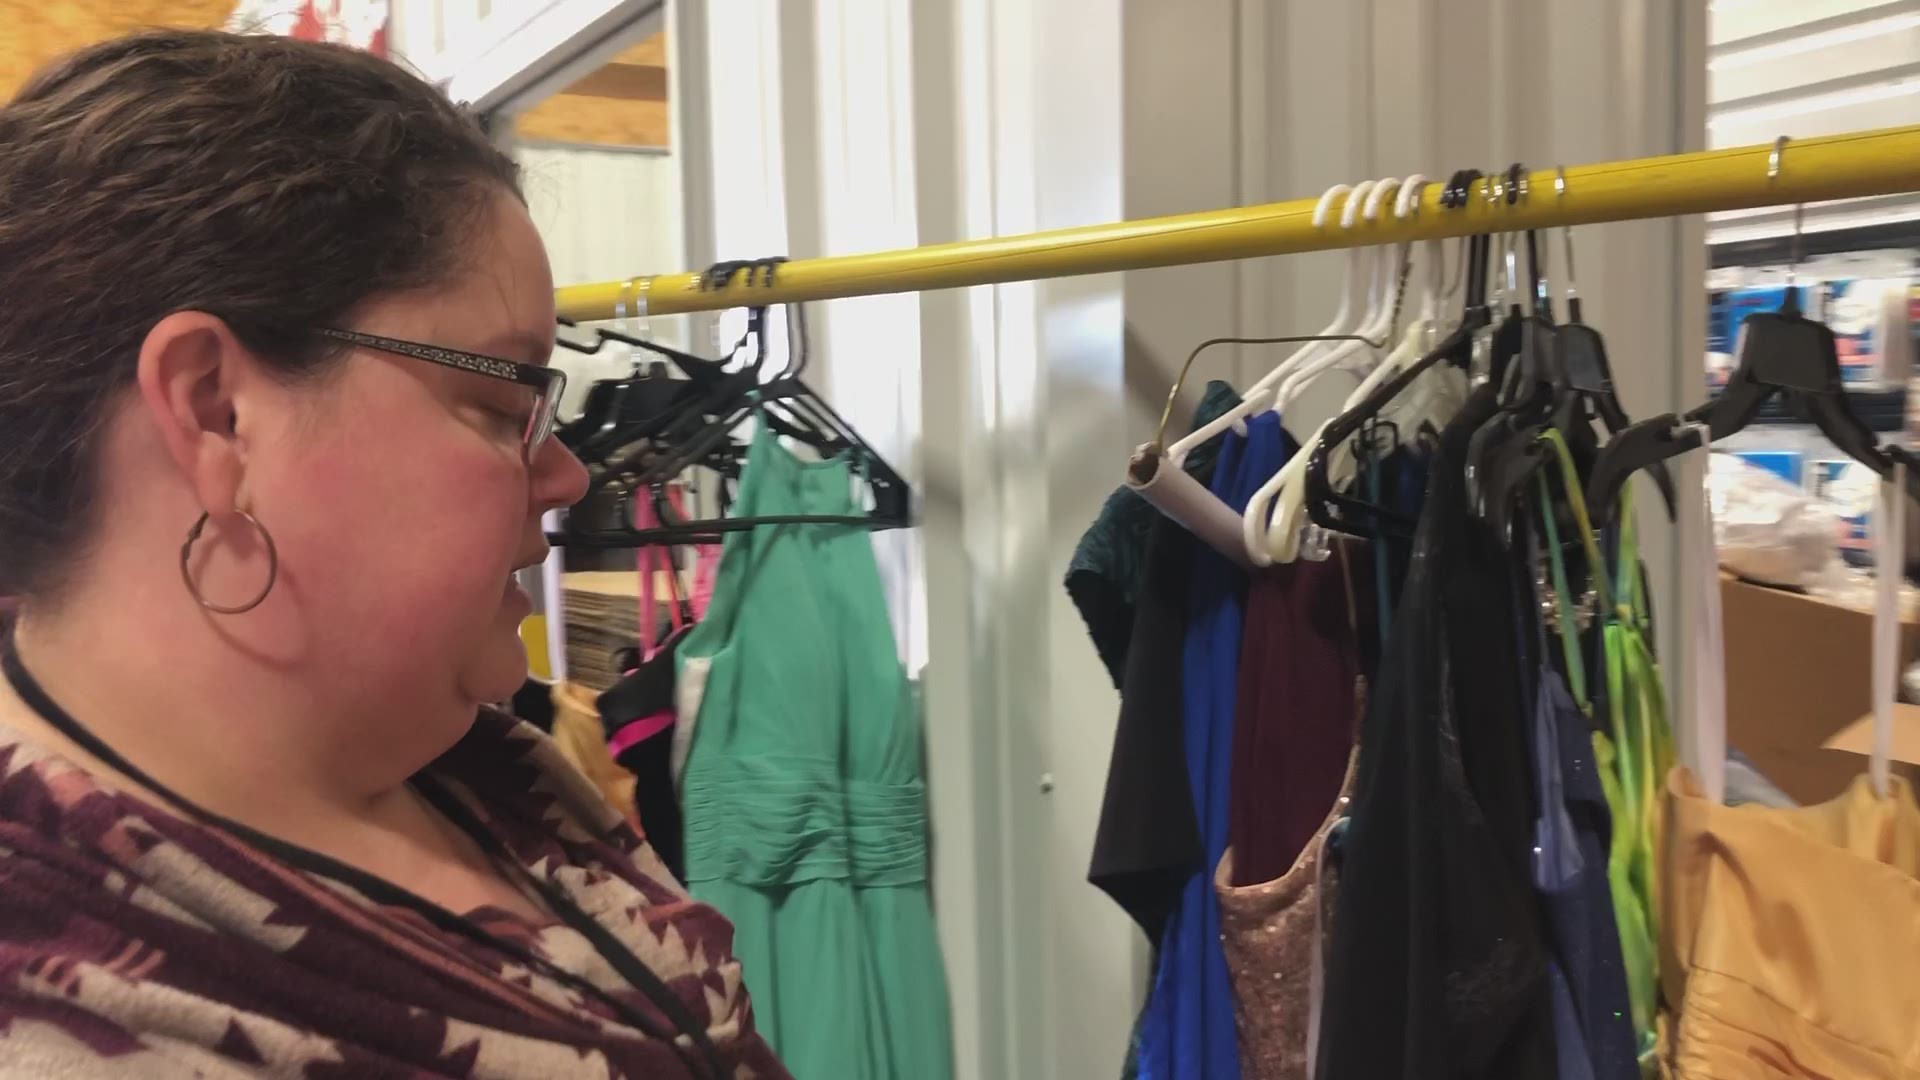 At least a thousand dresses have been collected at the annual prom dress drive. Dozens of people dropped off hundreds of dresses to help those in need.